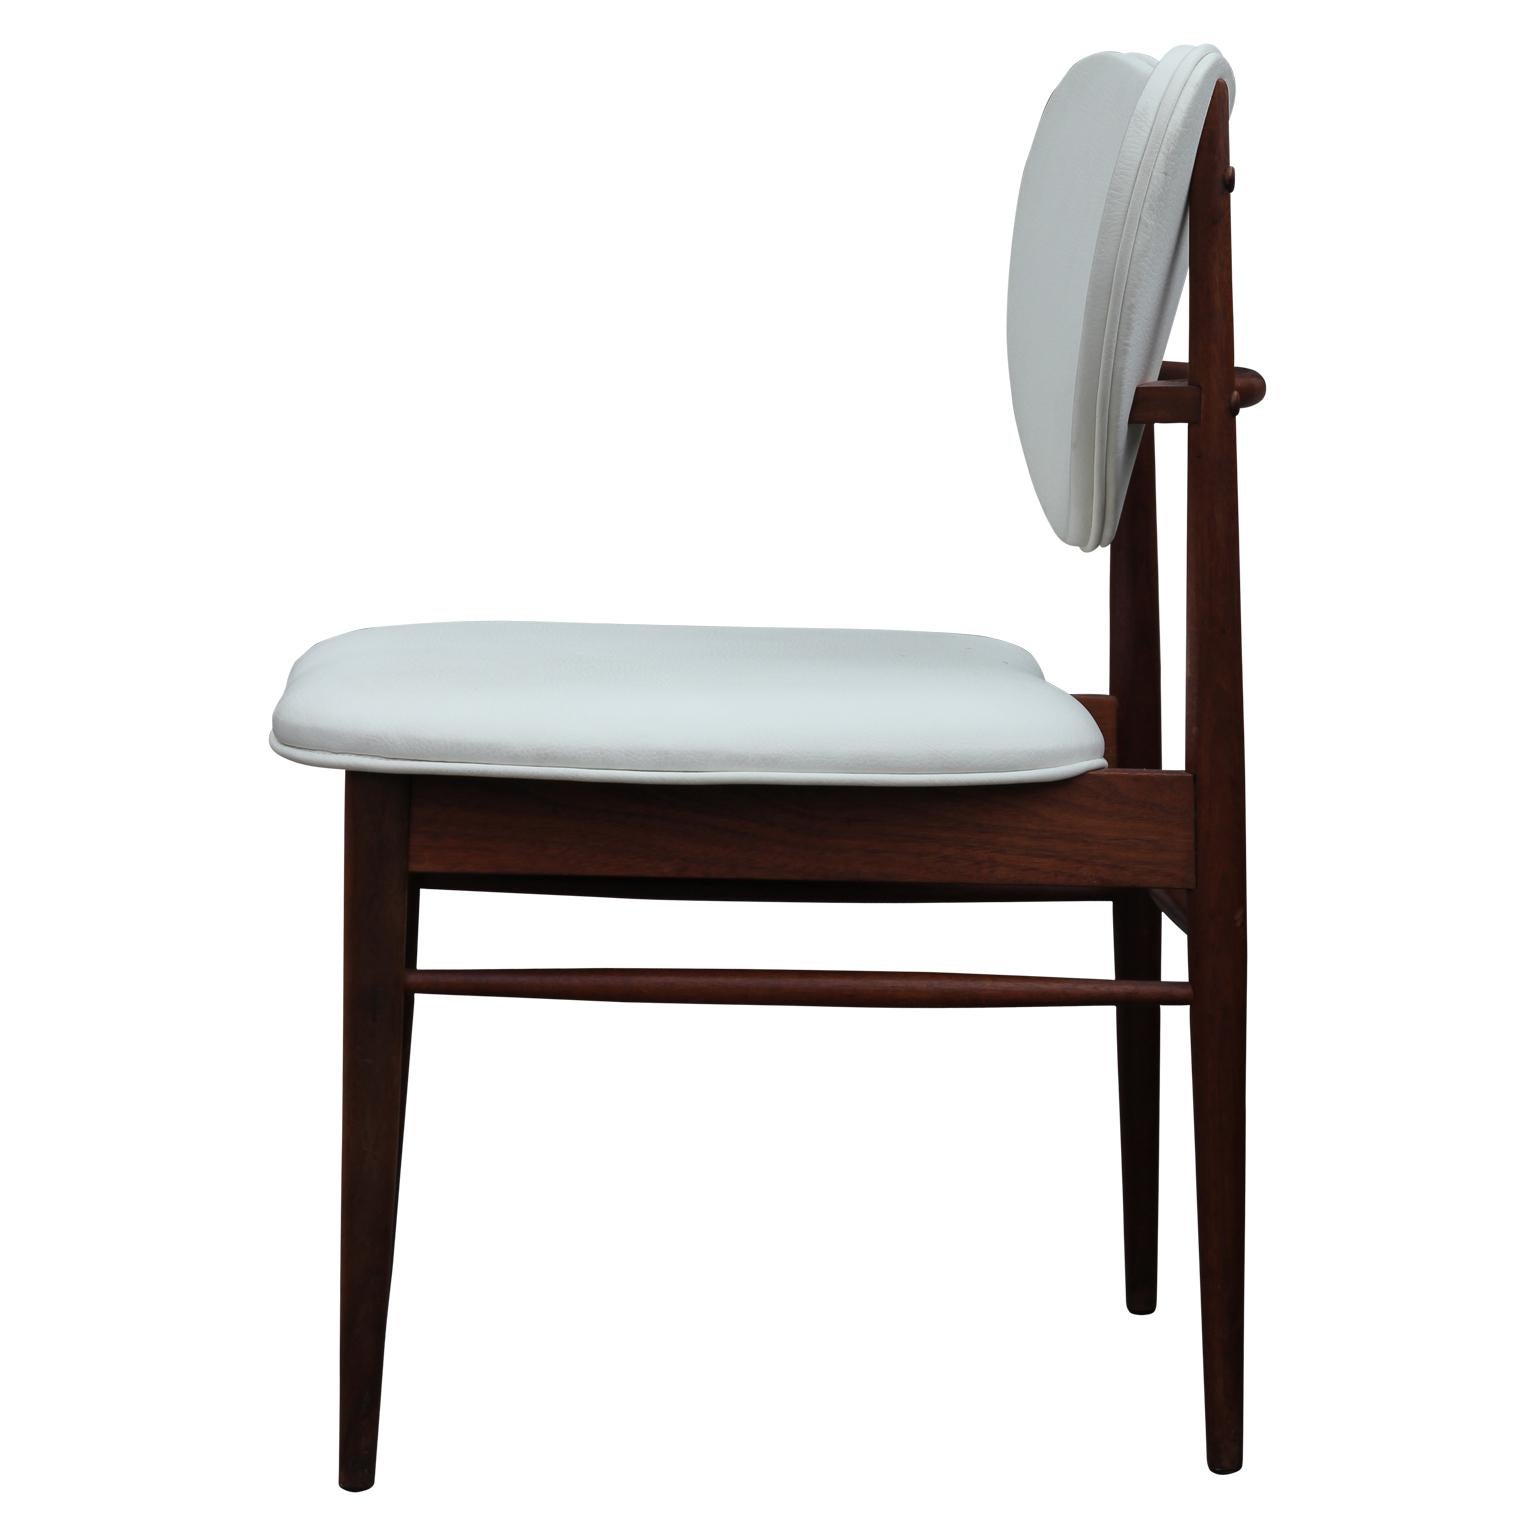 European Set of 4 Modern Dining Chairs in the Style of Finn Juhl, 1950s